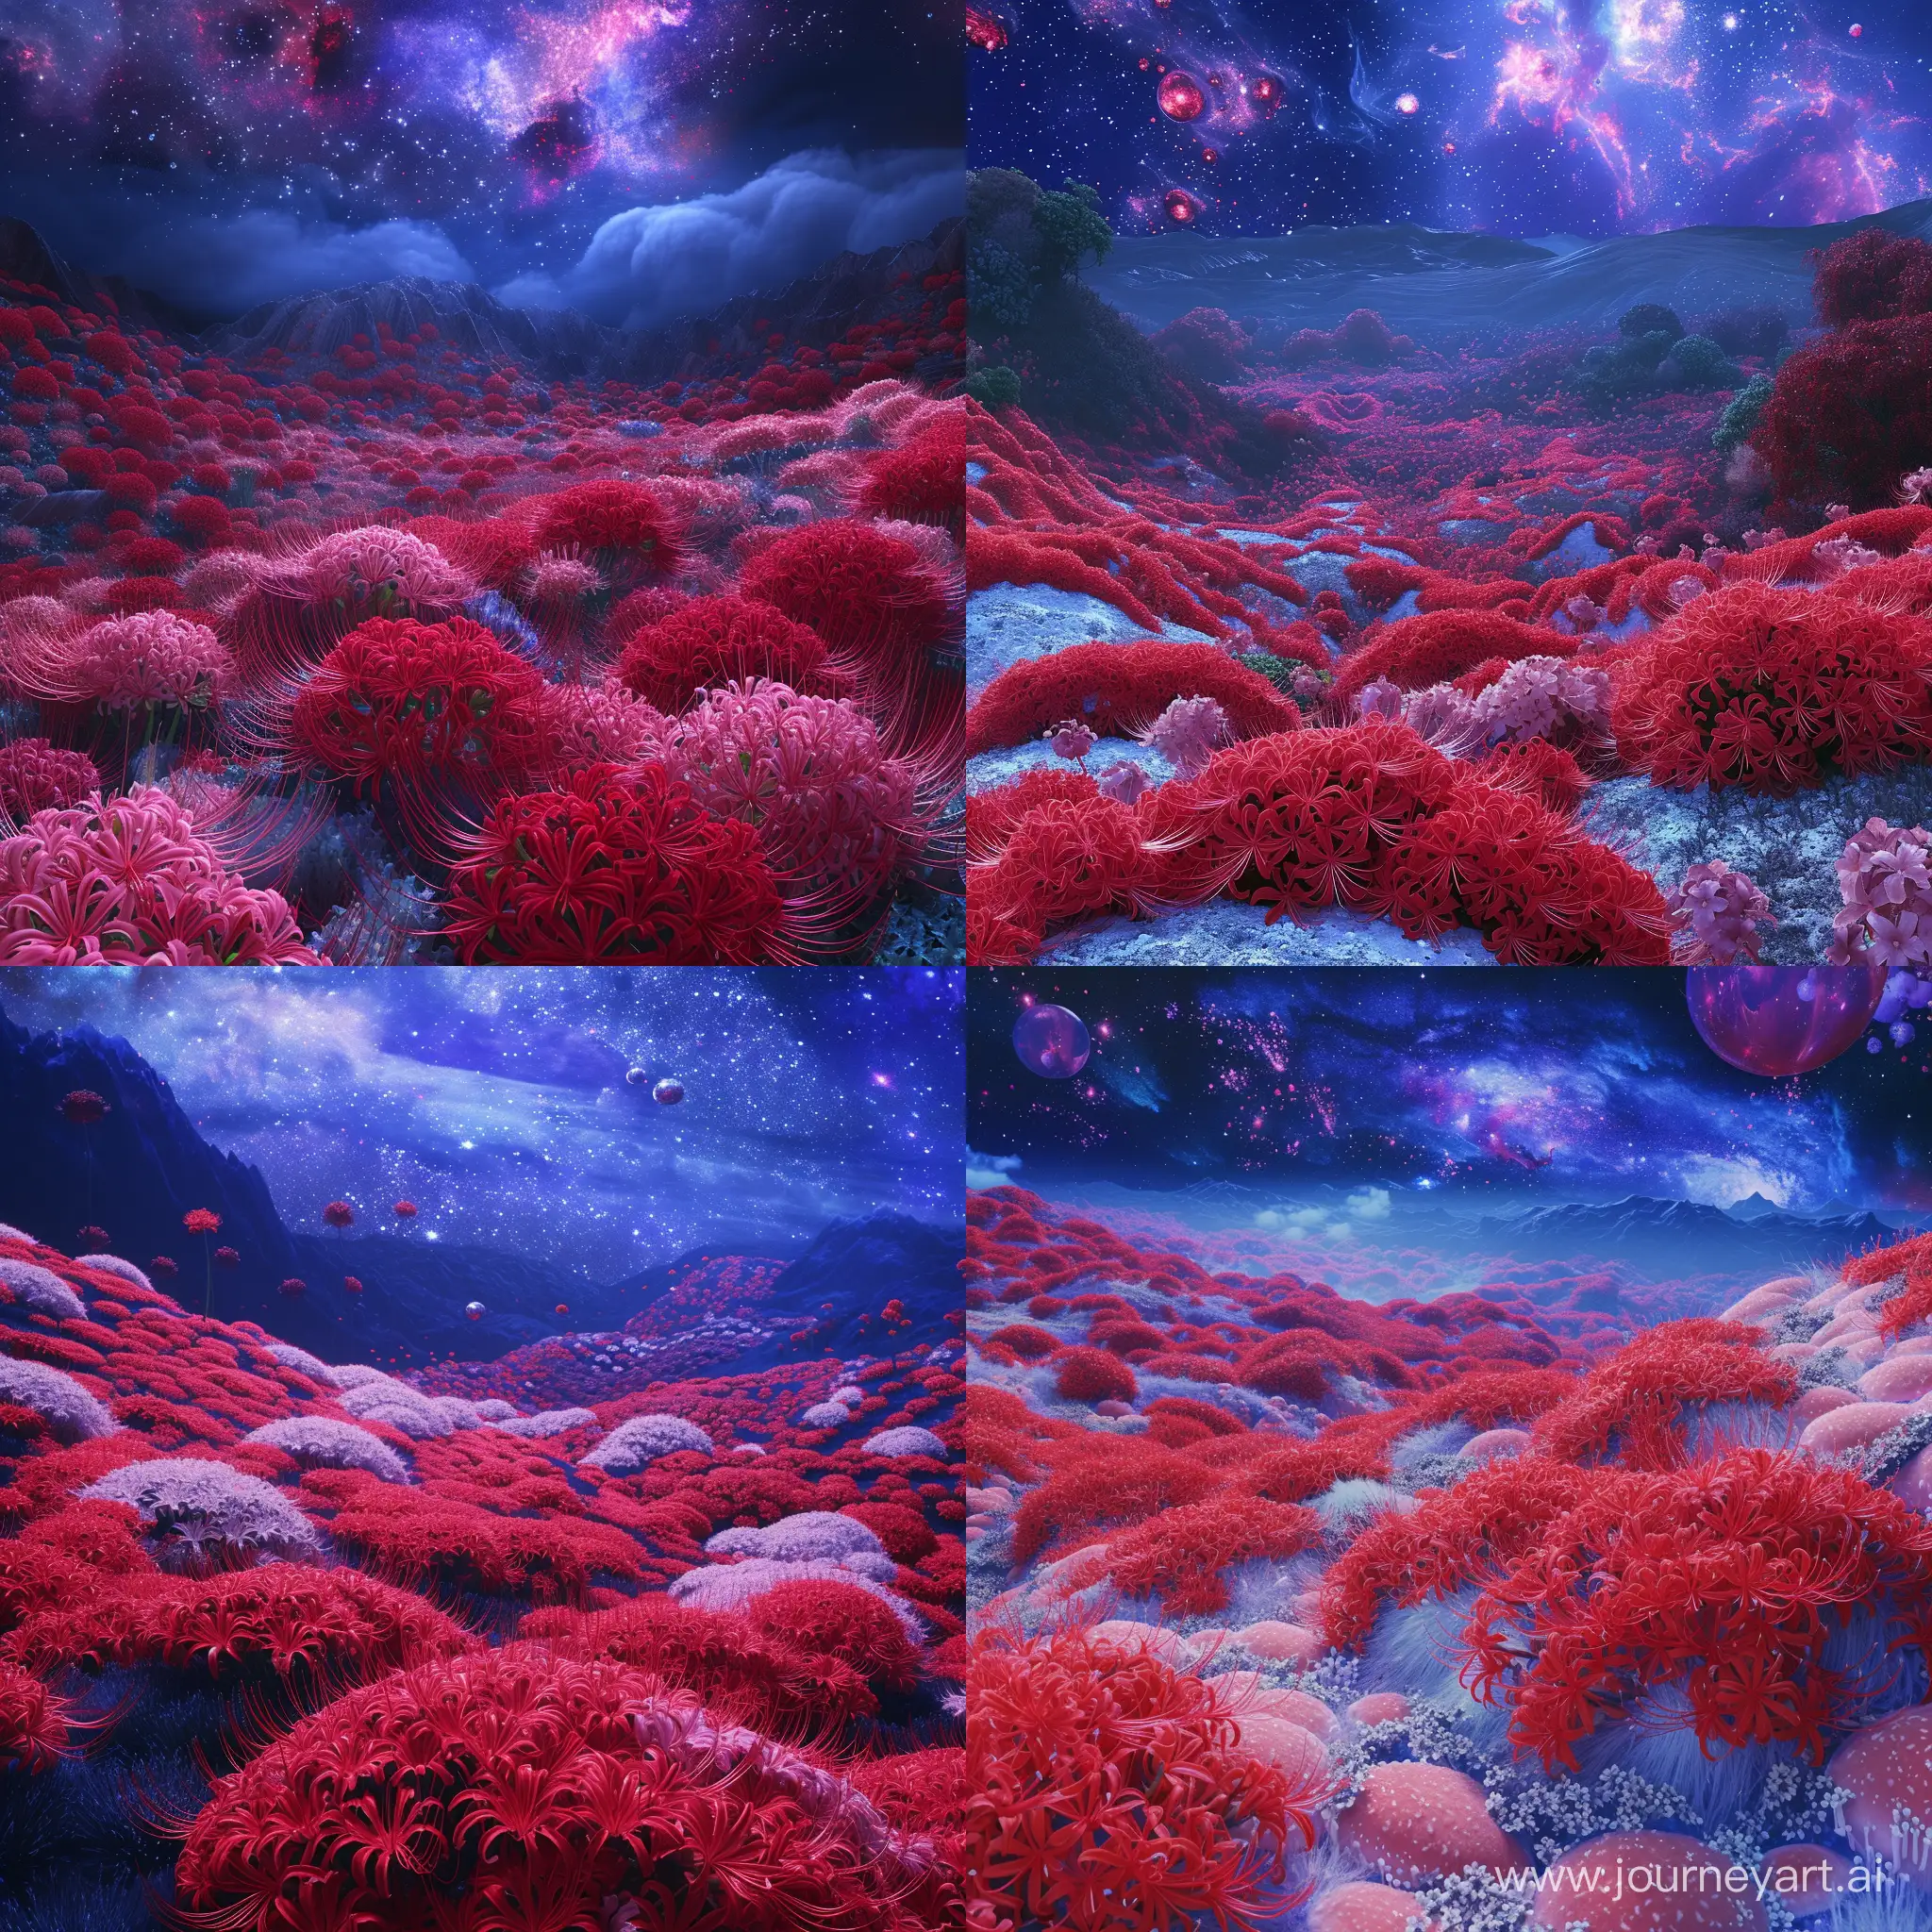 Envision a surreal, masterpiece of a scene featuring a sprawling garden blanketed in an array of vibrant, yet somber red and pink Lycoris radiata and red spider lilies. The undulating ground evokes disorientation, creating a sense of being lost in a vast, limitless world. A cold, isolation vibe resonates as the garden is drenched in a deep, bloody red theme, exuding a profound sadness that captures the feeling of sickness and dying inside of nature. The sky above is a deep midnight blue, adorned with cosmic elements that create an otherworldly beauty. Magnificent, enormous celestial bodies shimmer in captivating shades of beautiful purples and indigos, imparting a high cosmical element that adds to the surrealism of the scene --q 4